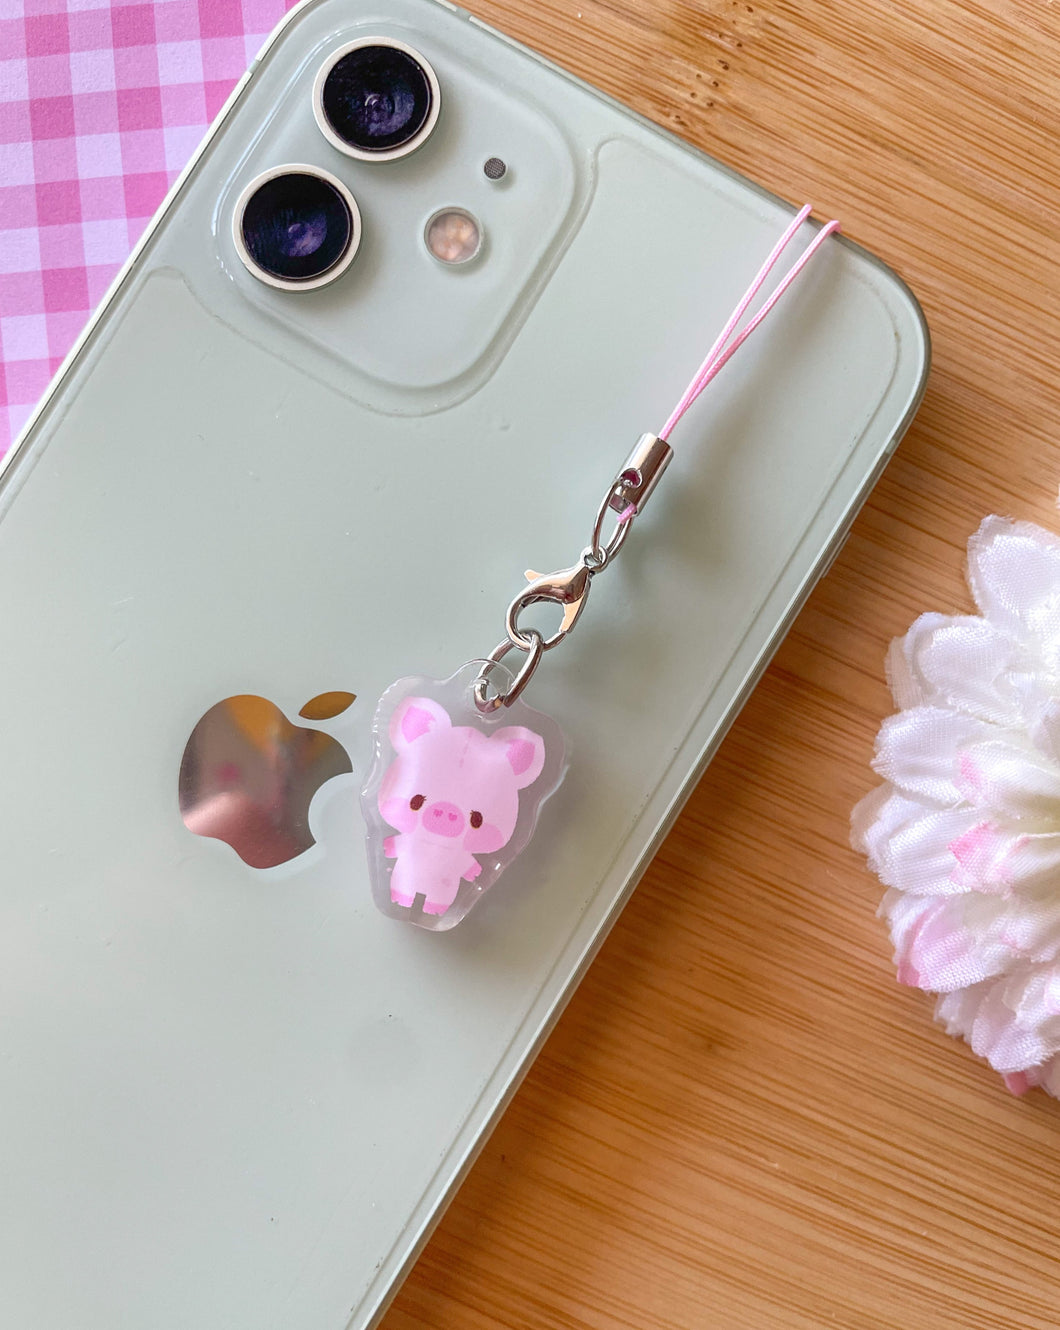 Biscuit the Pig Phone Charm